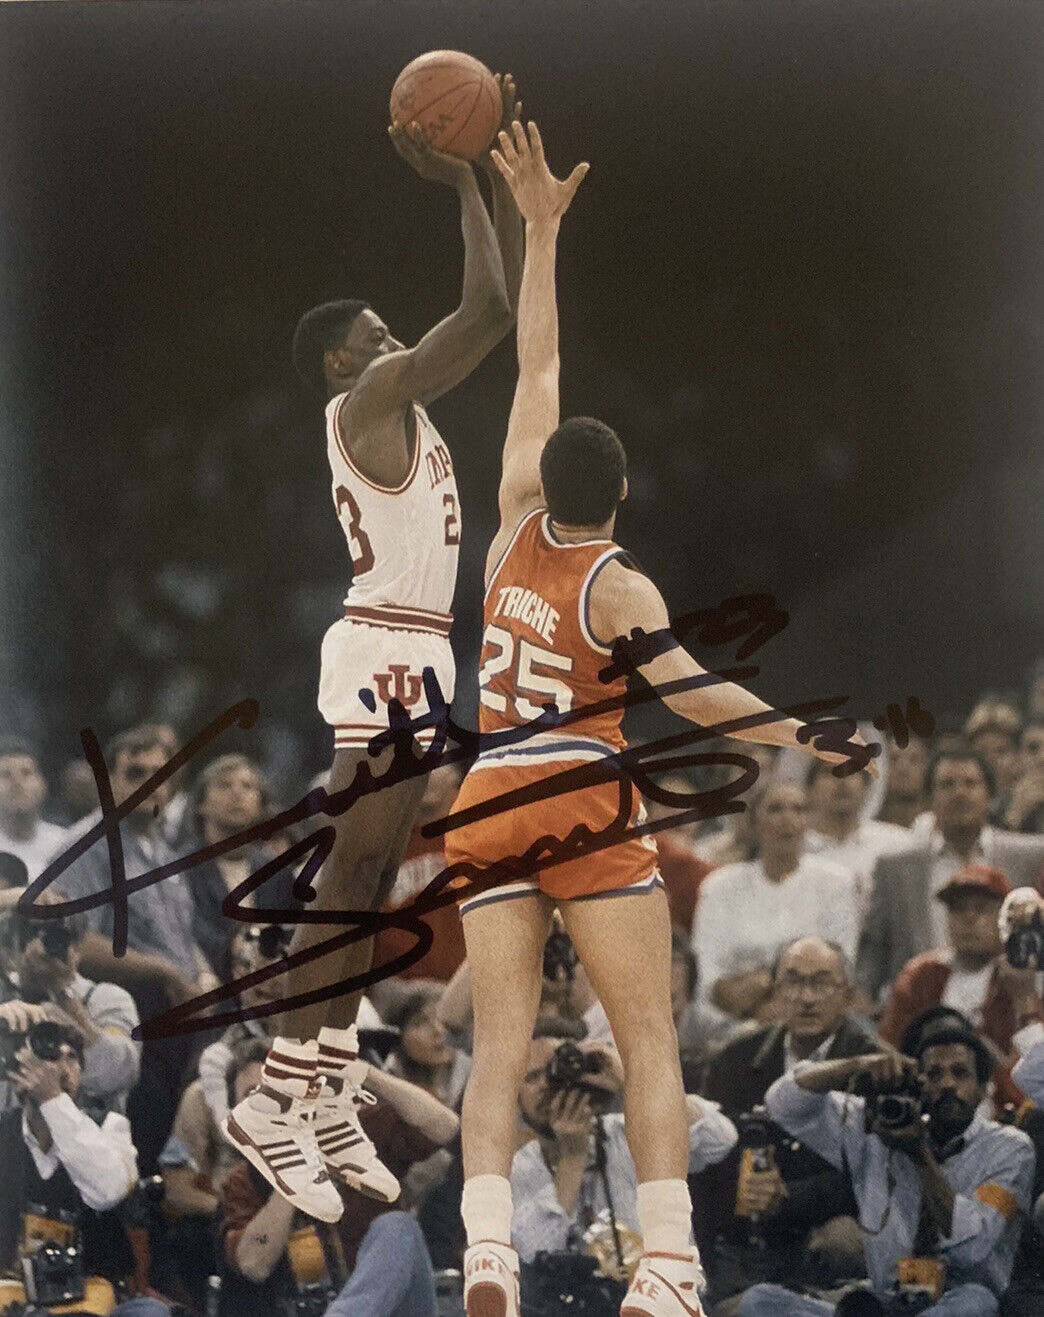 KEITH SMART HAND SIGNED 8x10 Photo Poster painting INDIANA BASKETBALL BUZZER BEATER AUTO COA